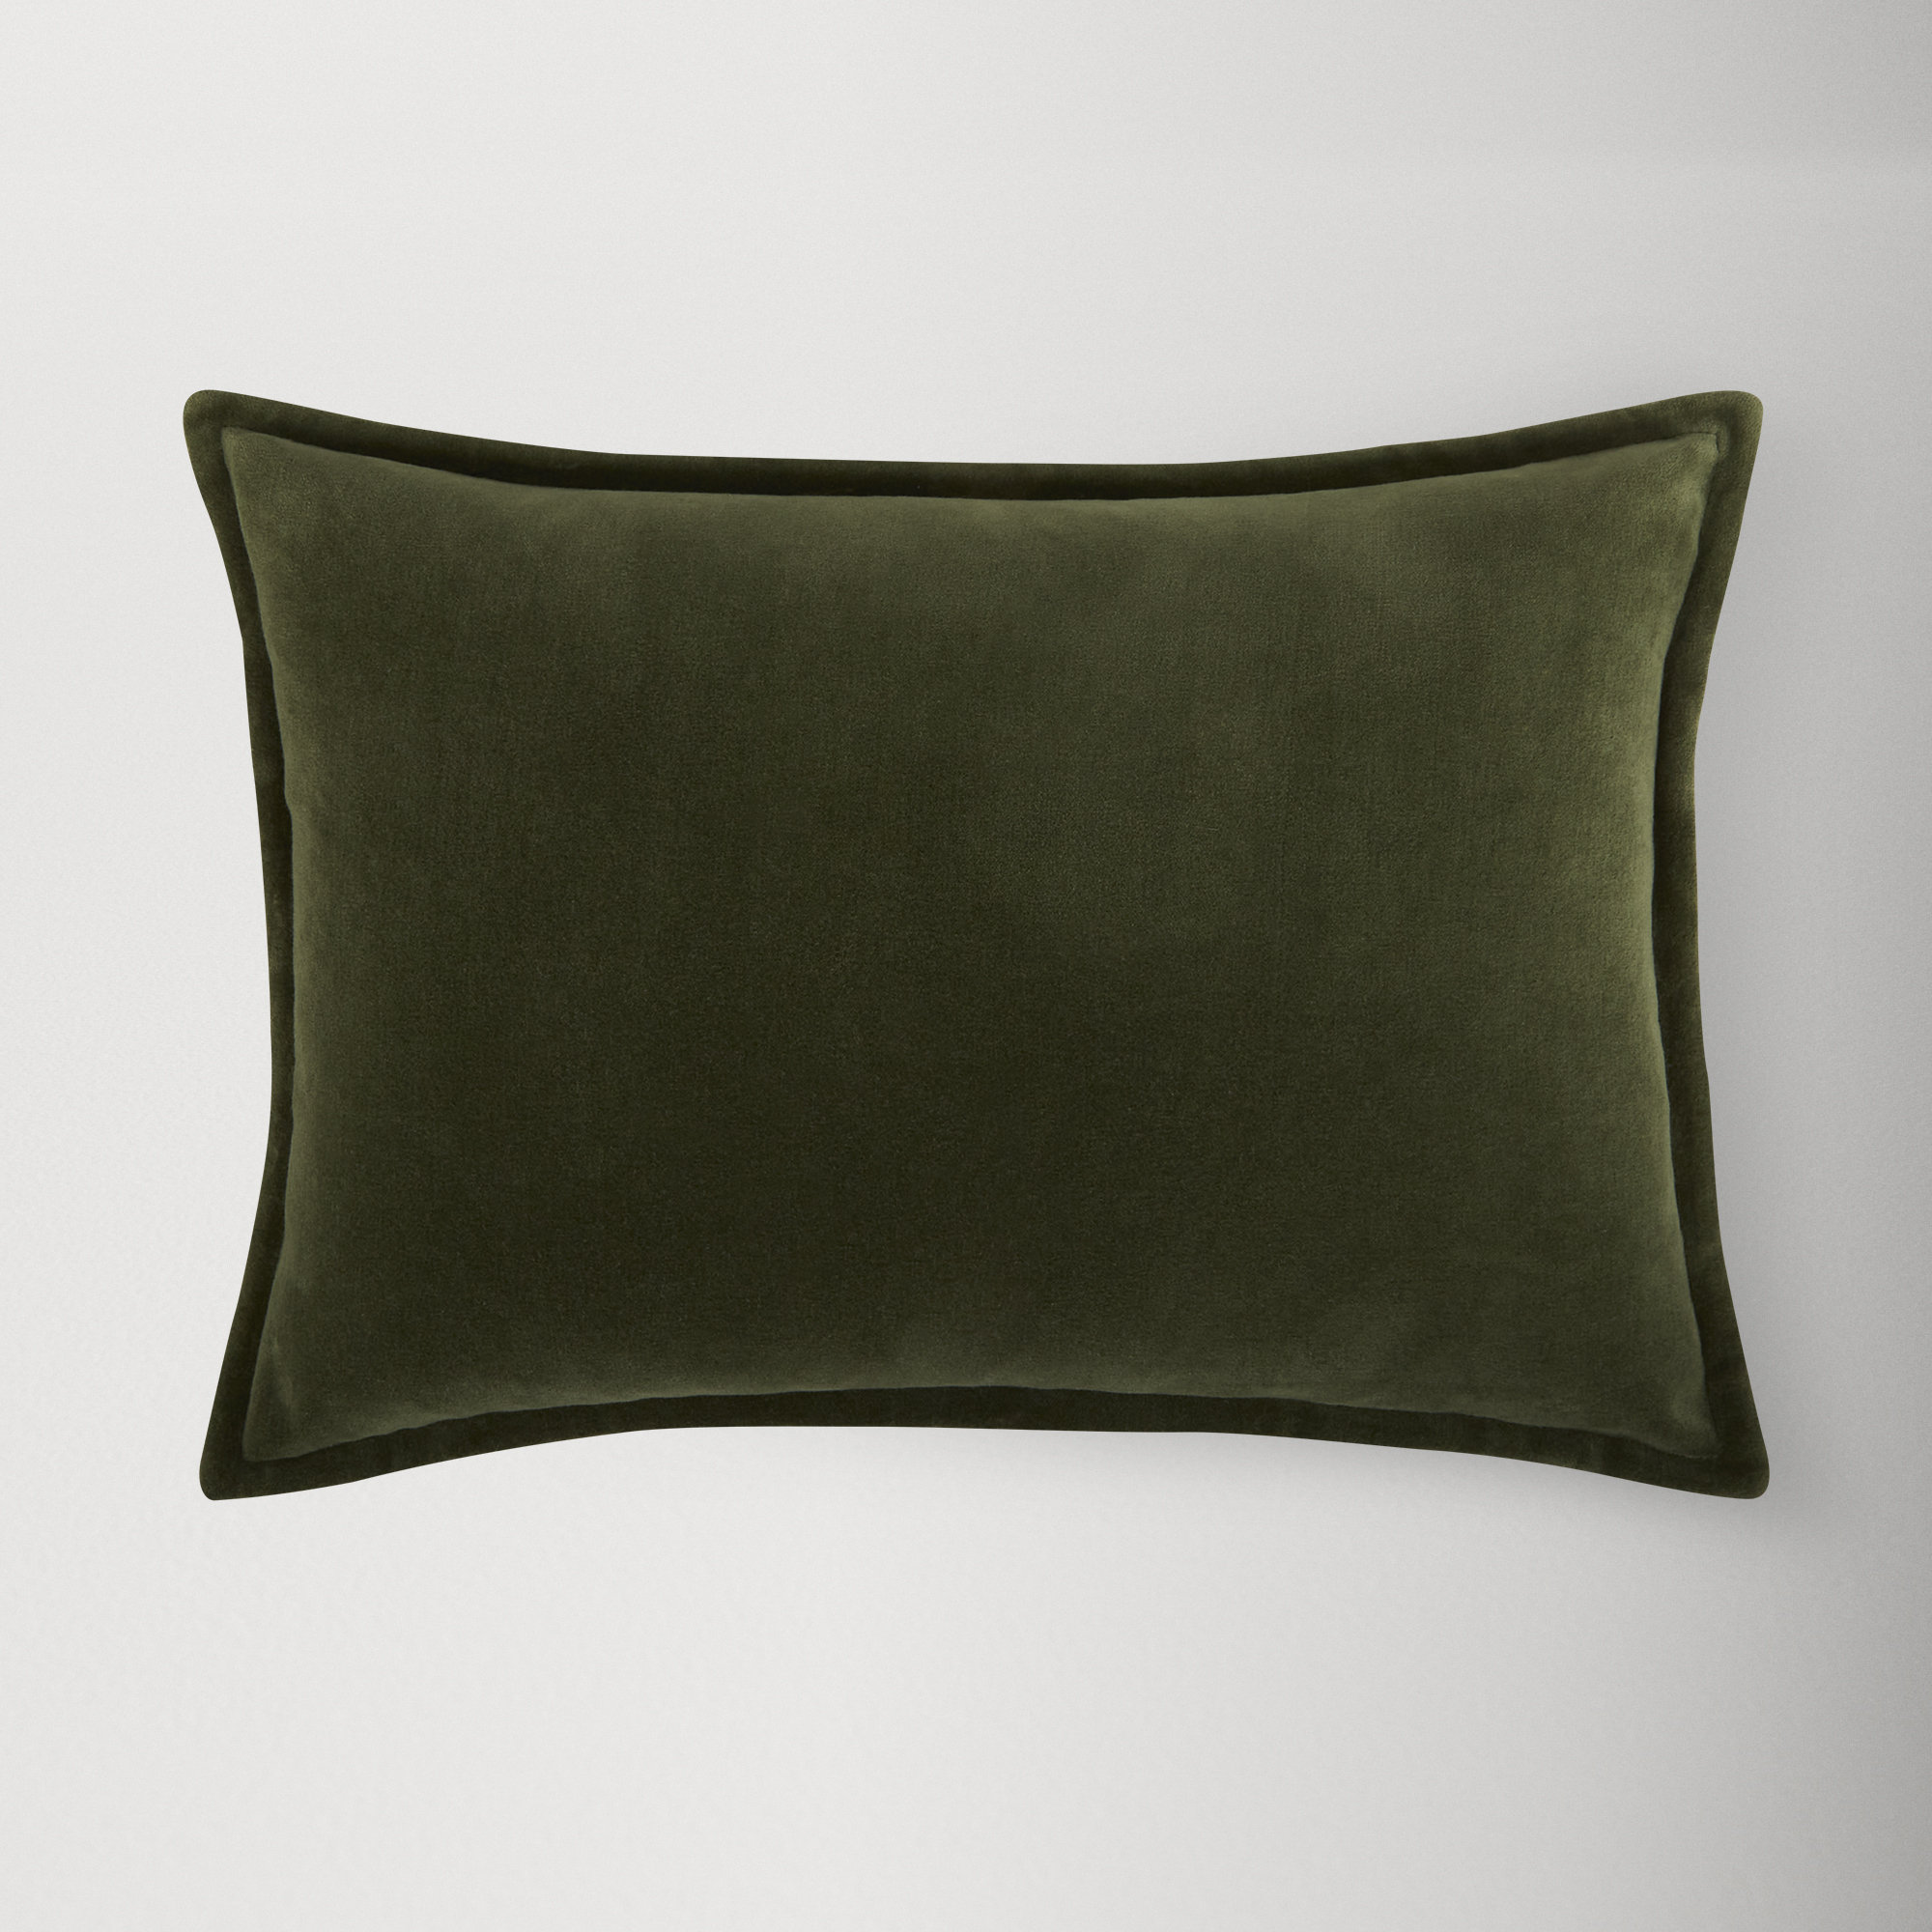 LOGAN BIG PILLOW WITH INSERT OLIVE